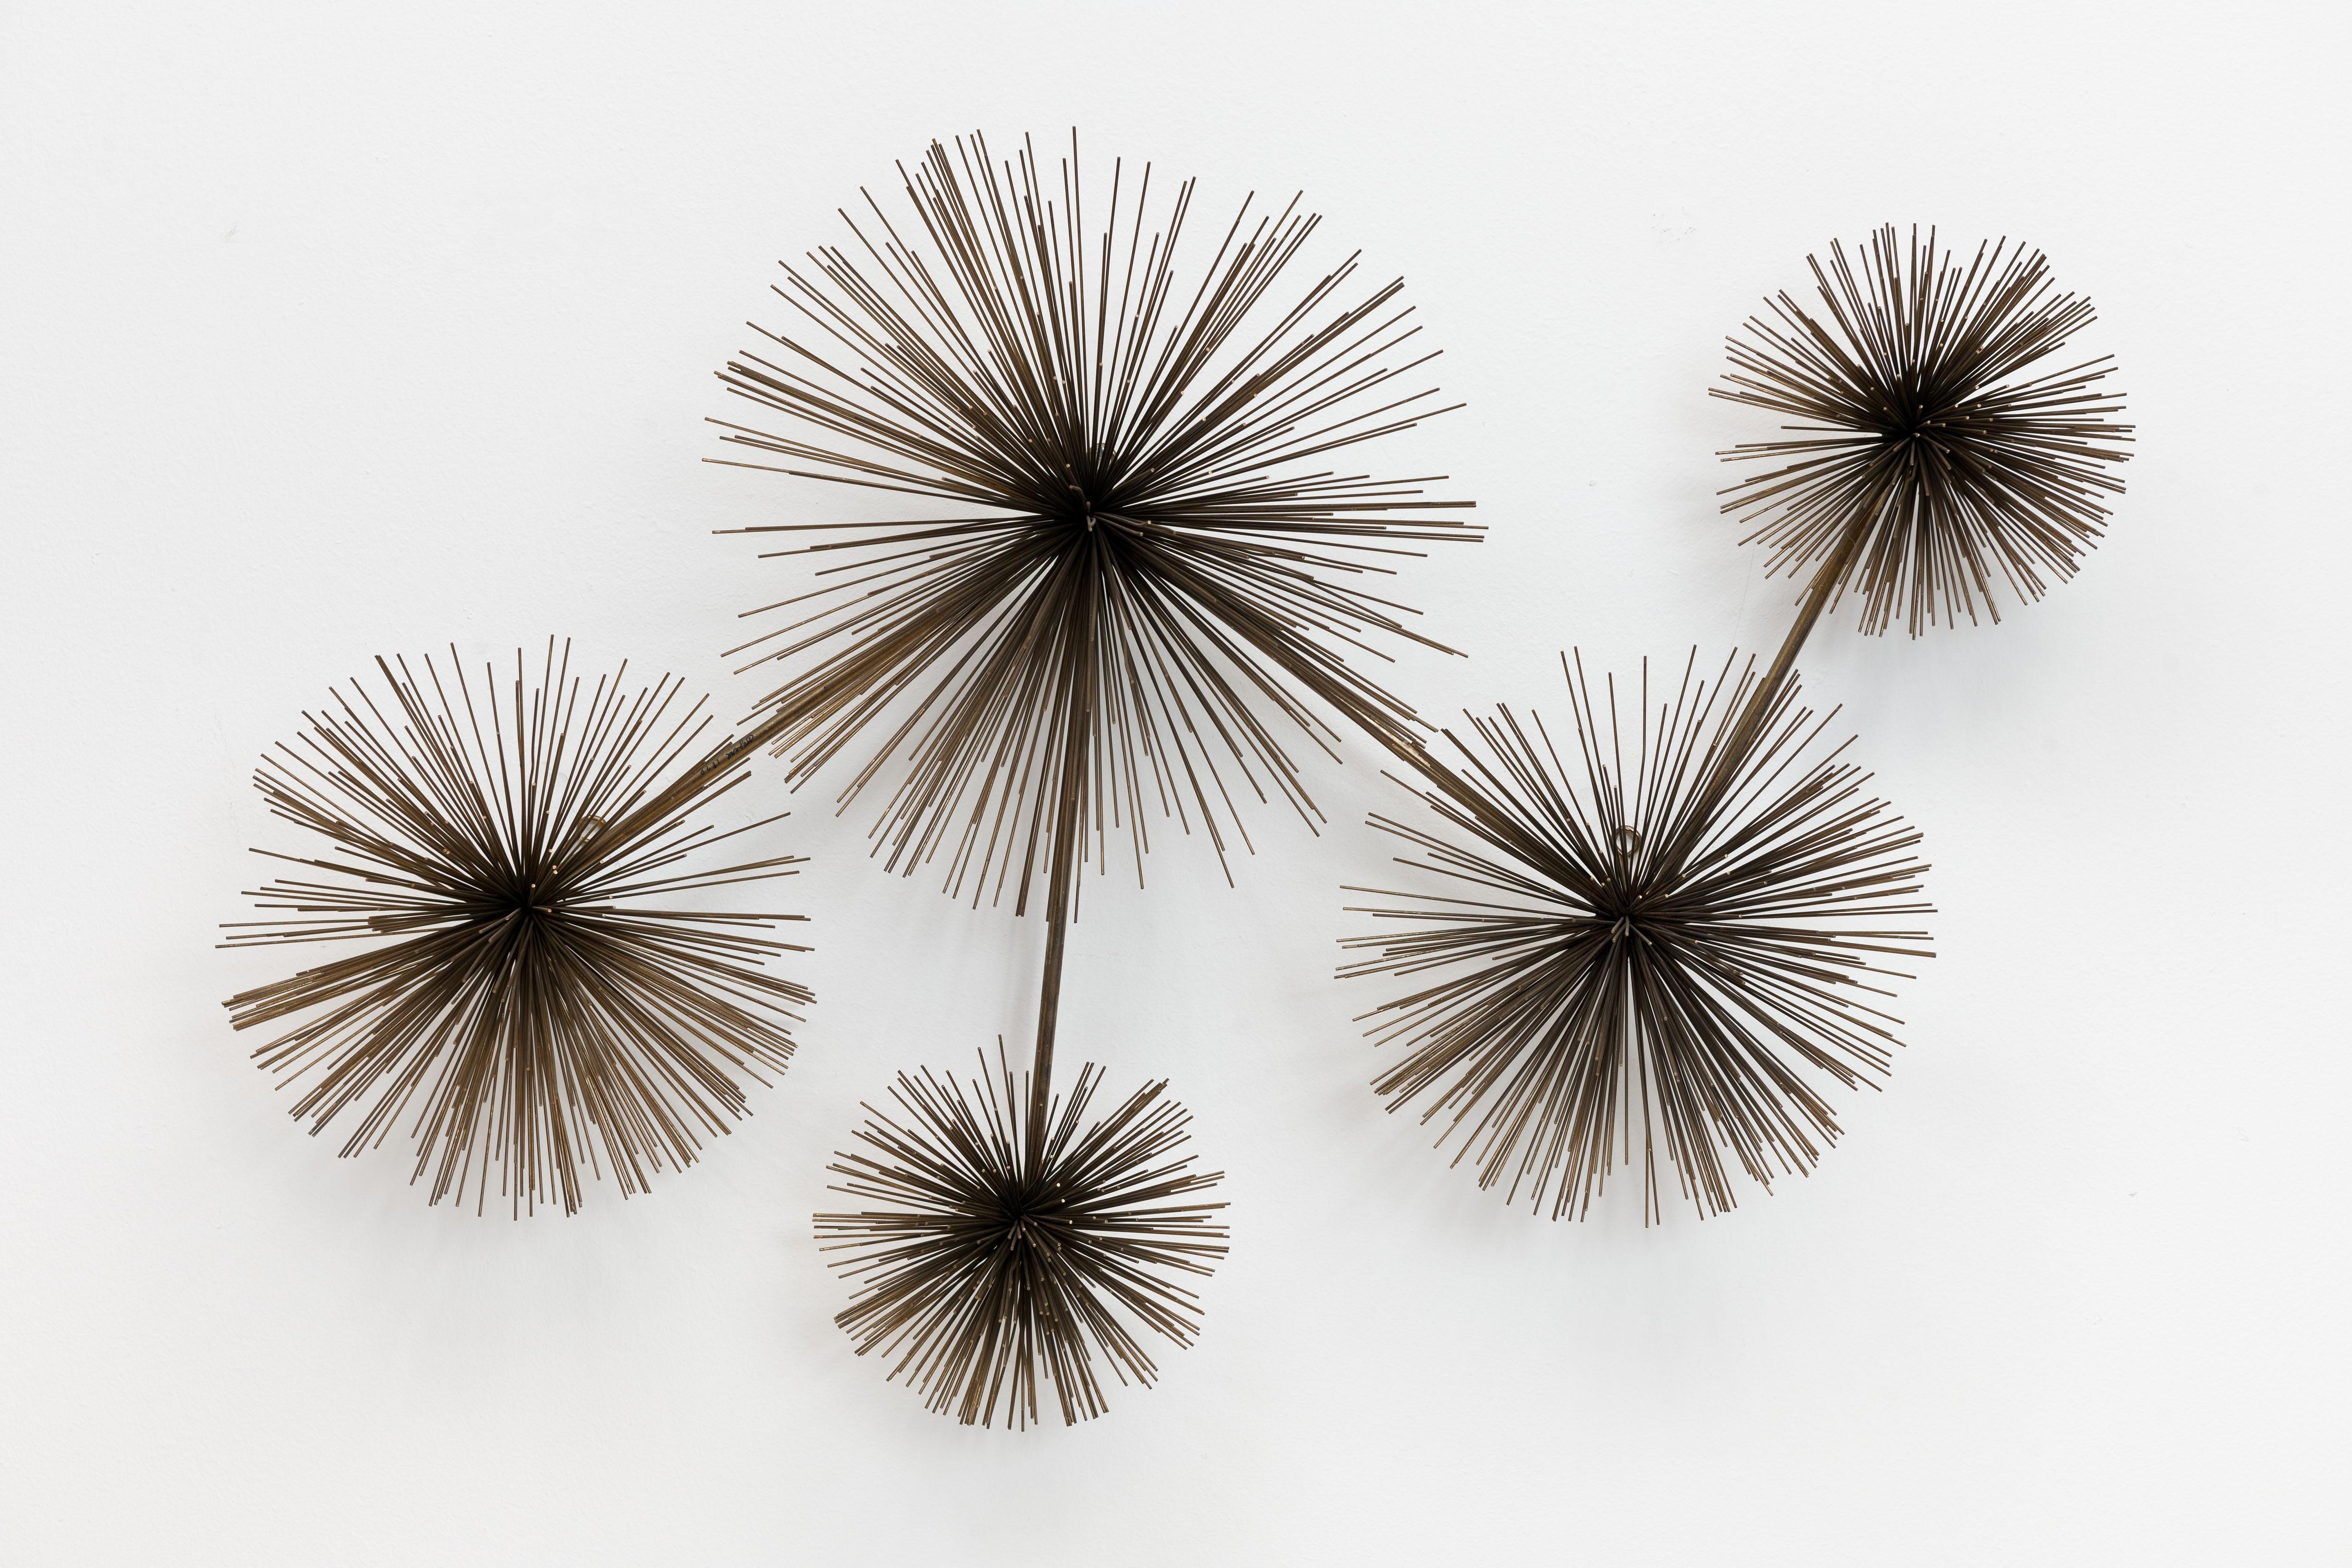 Mid-Century Modern Brass Curtis Jere 'Pom Pom' Wall Sculpture, Fully Signed C. Jere, 1979